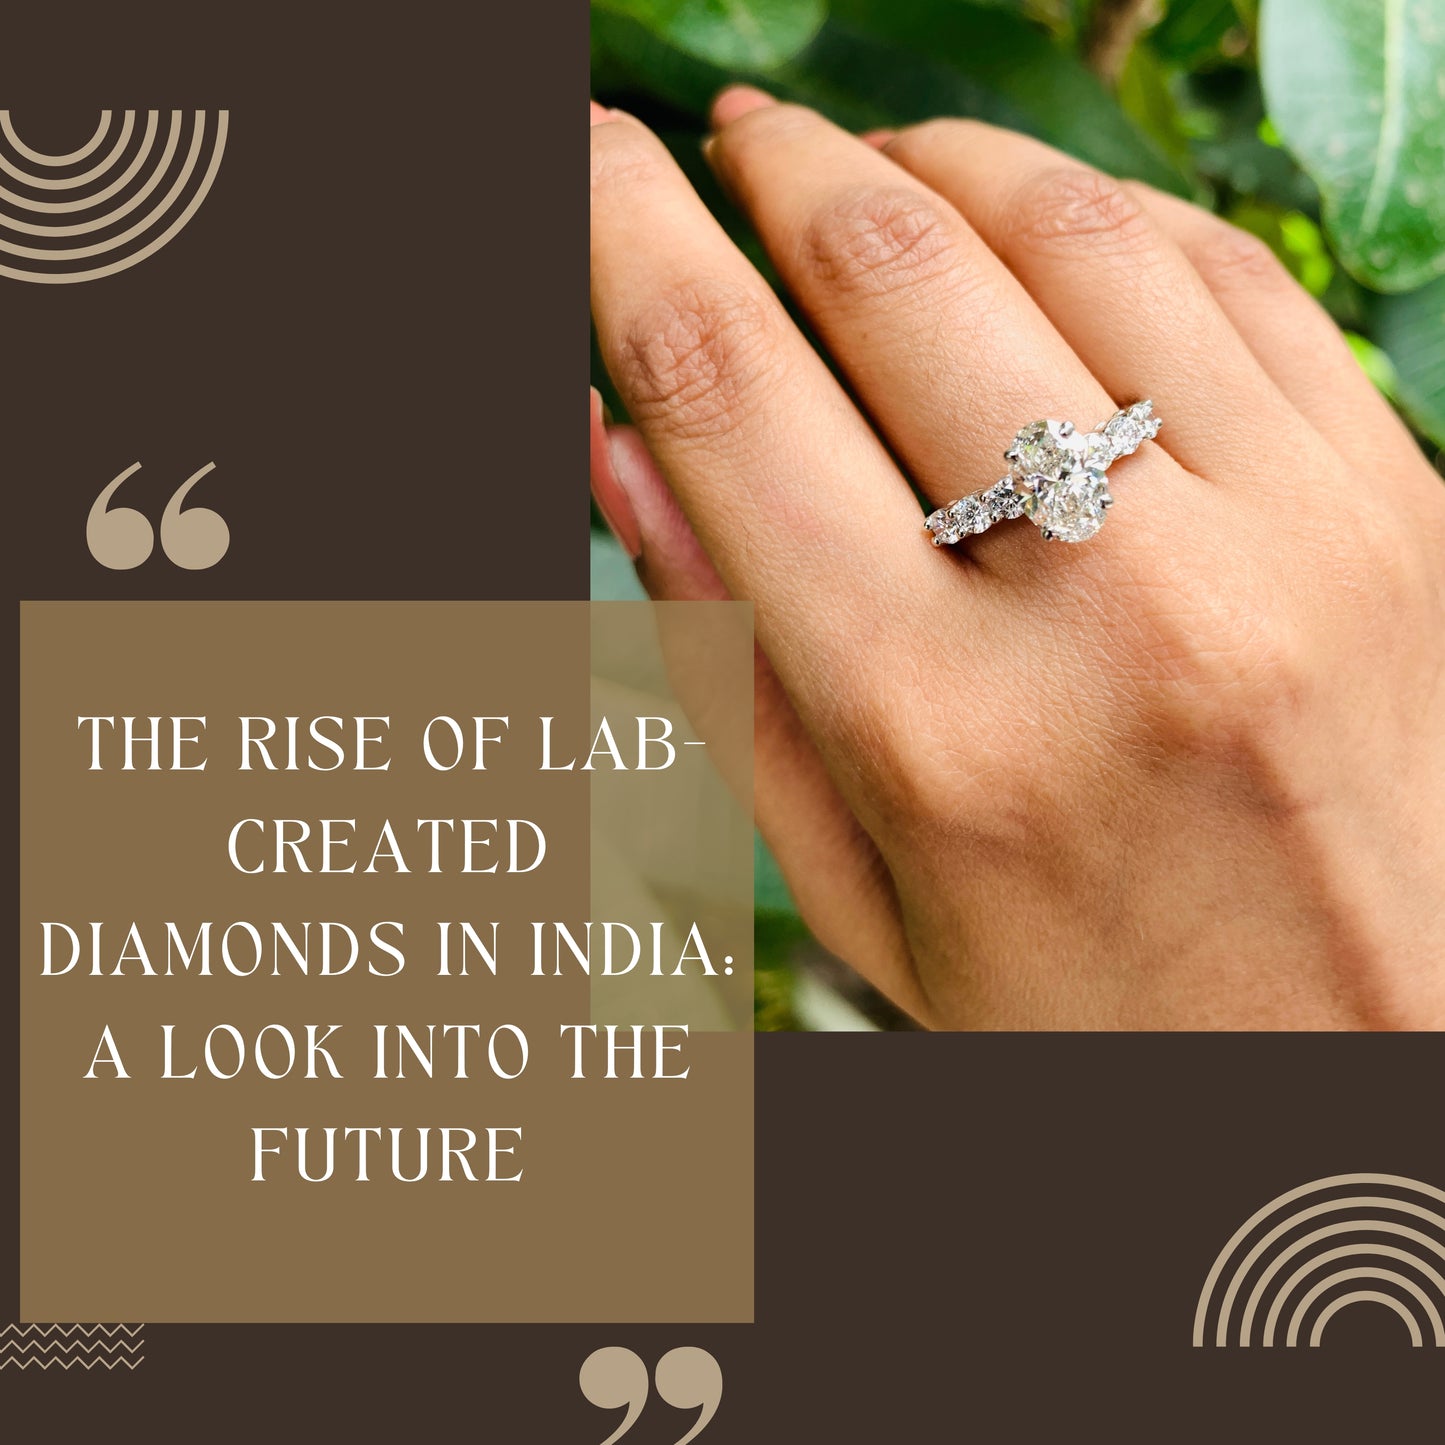 The Rise of Lab-Created Diamonds in India: A Look into the Future